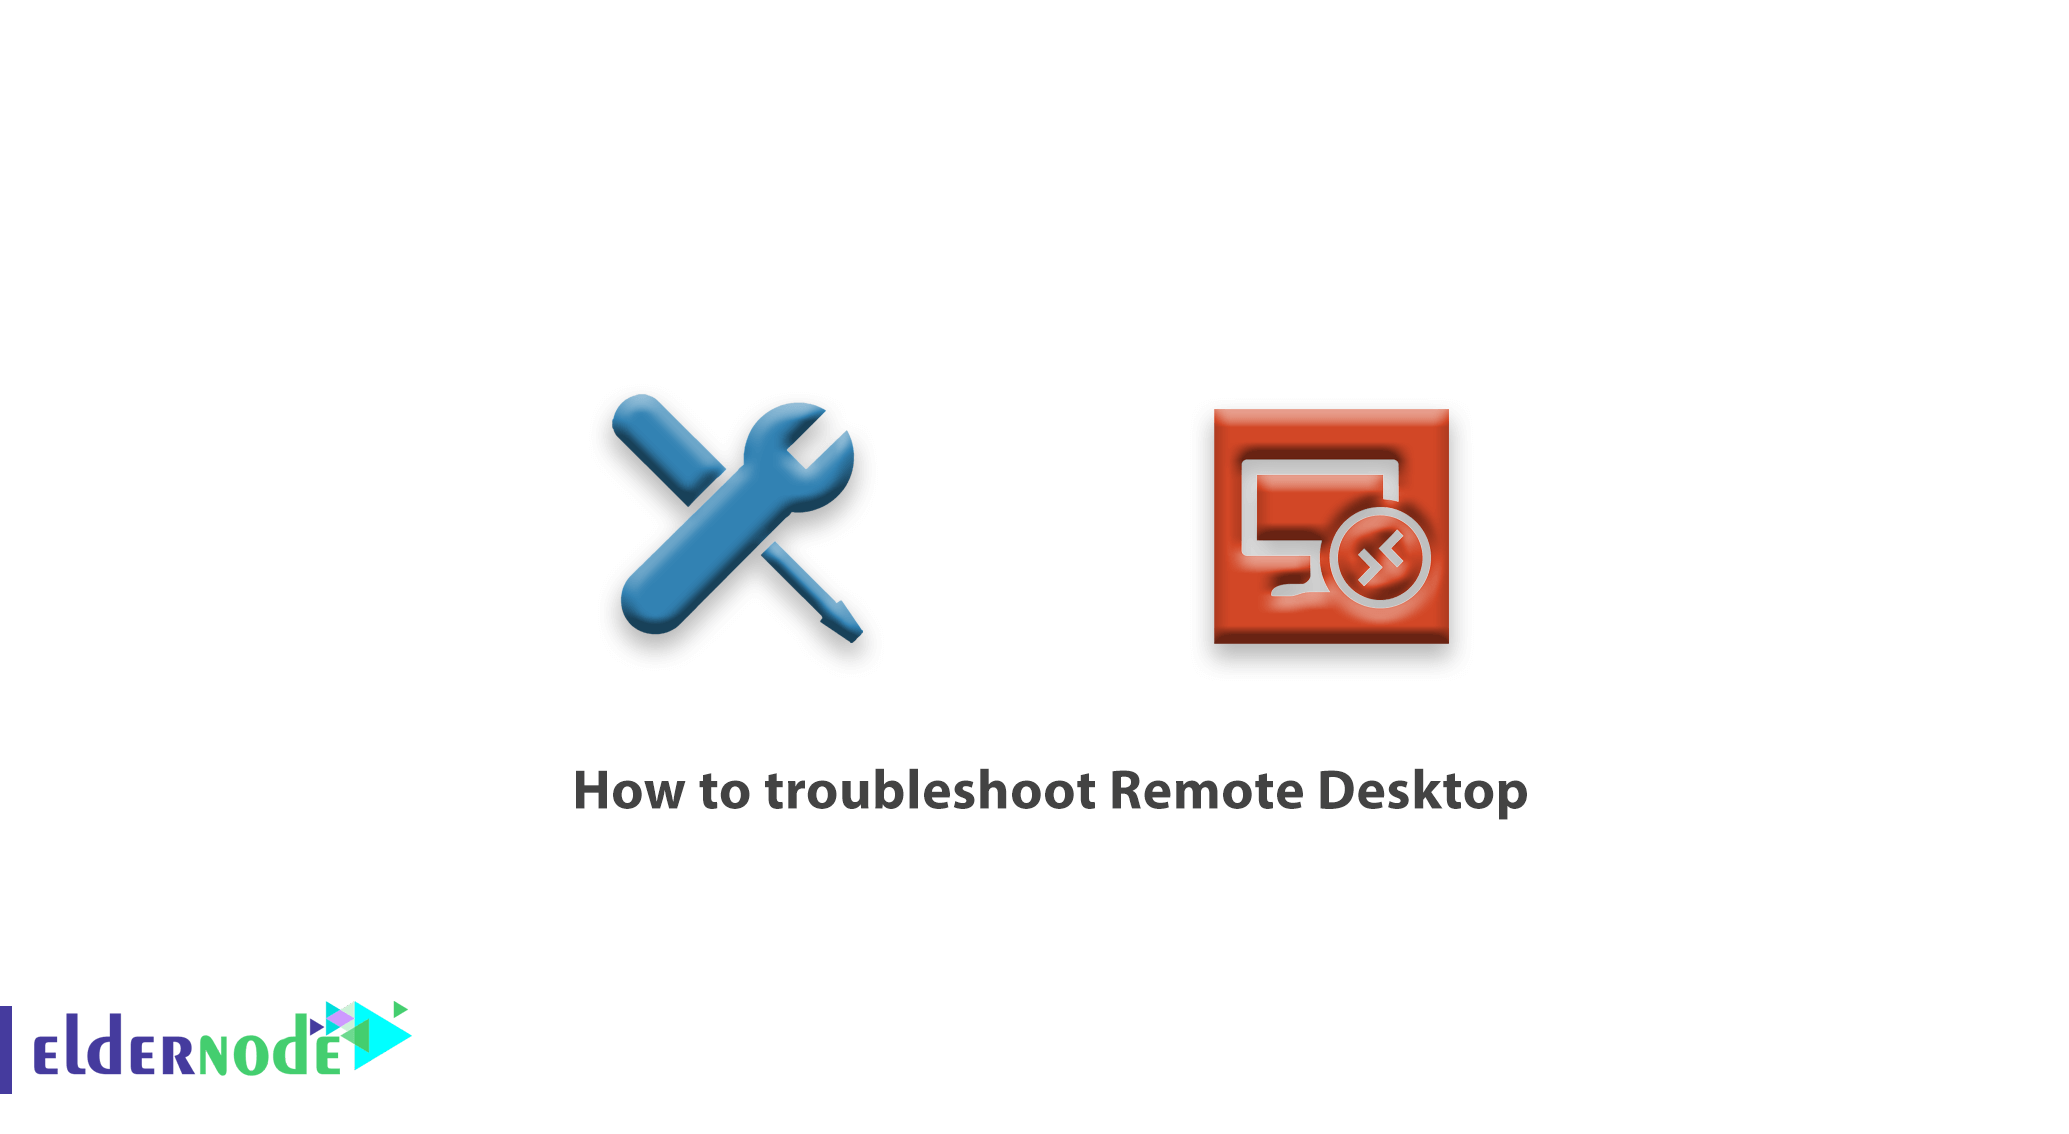 How to troubleshoot Remote Desktop